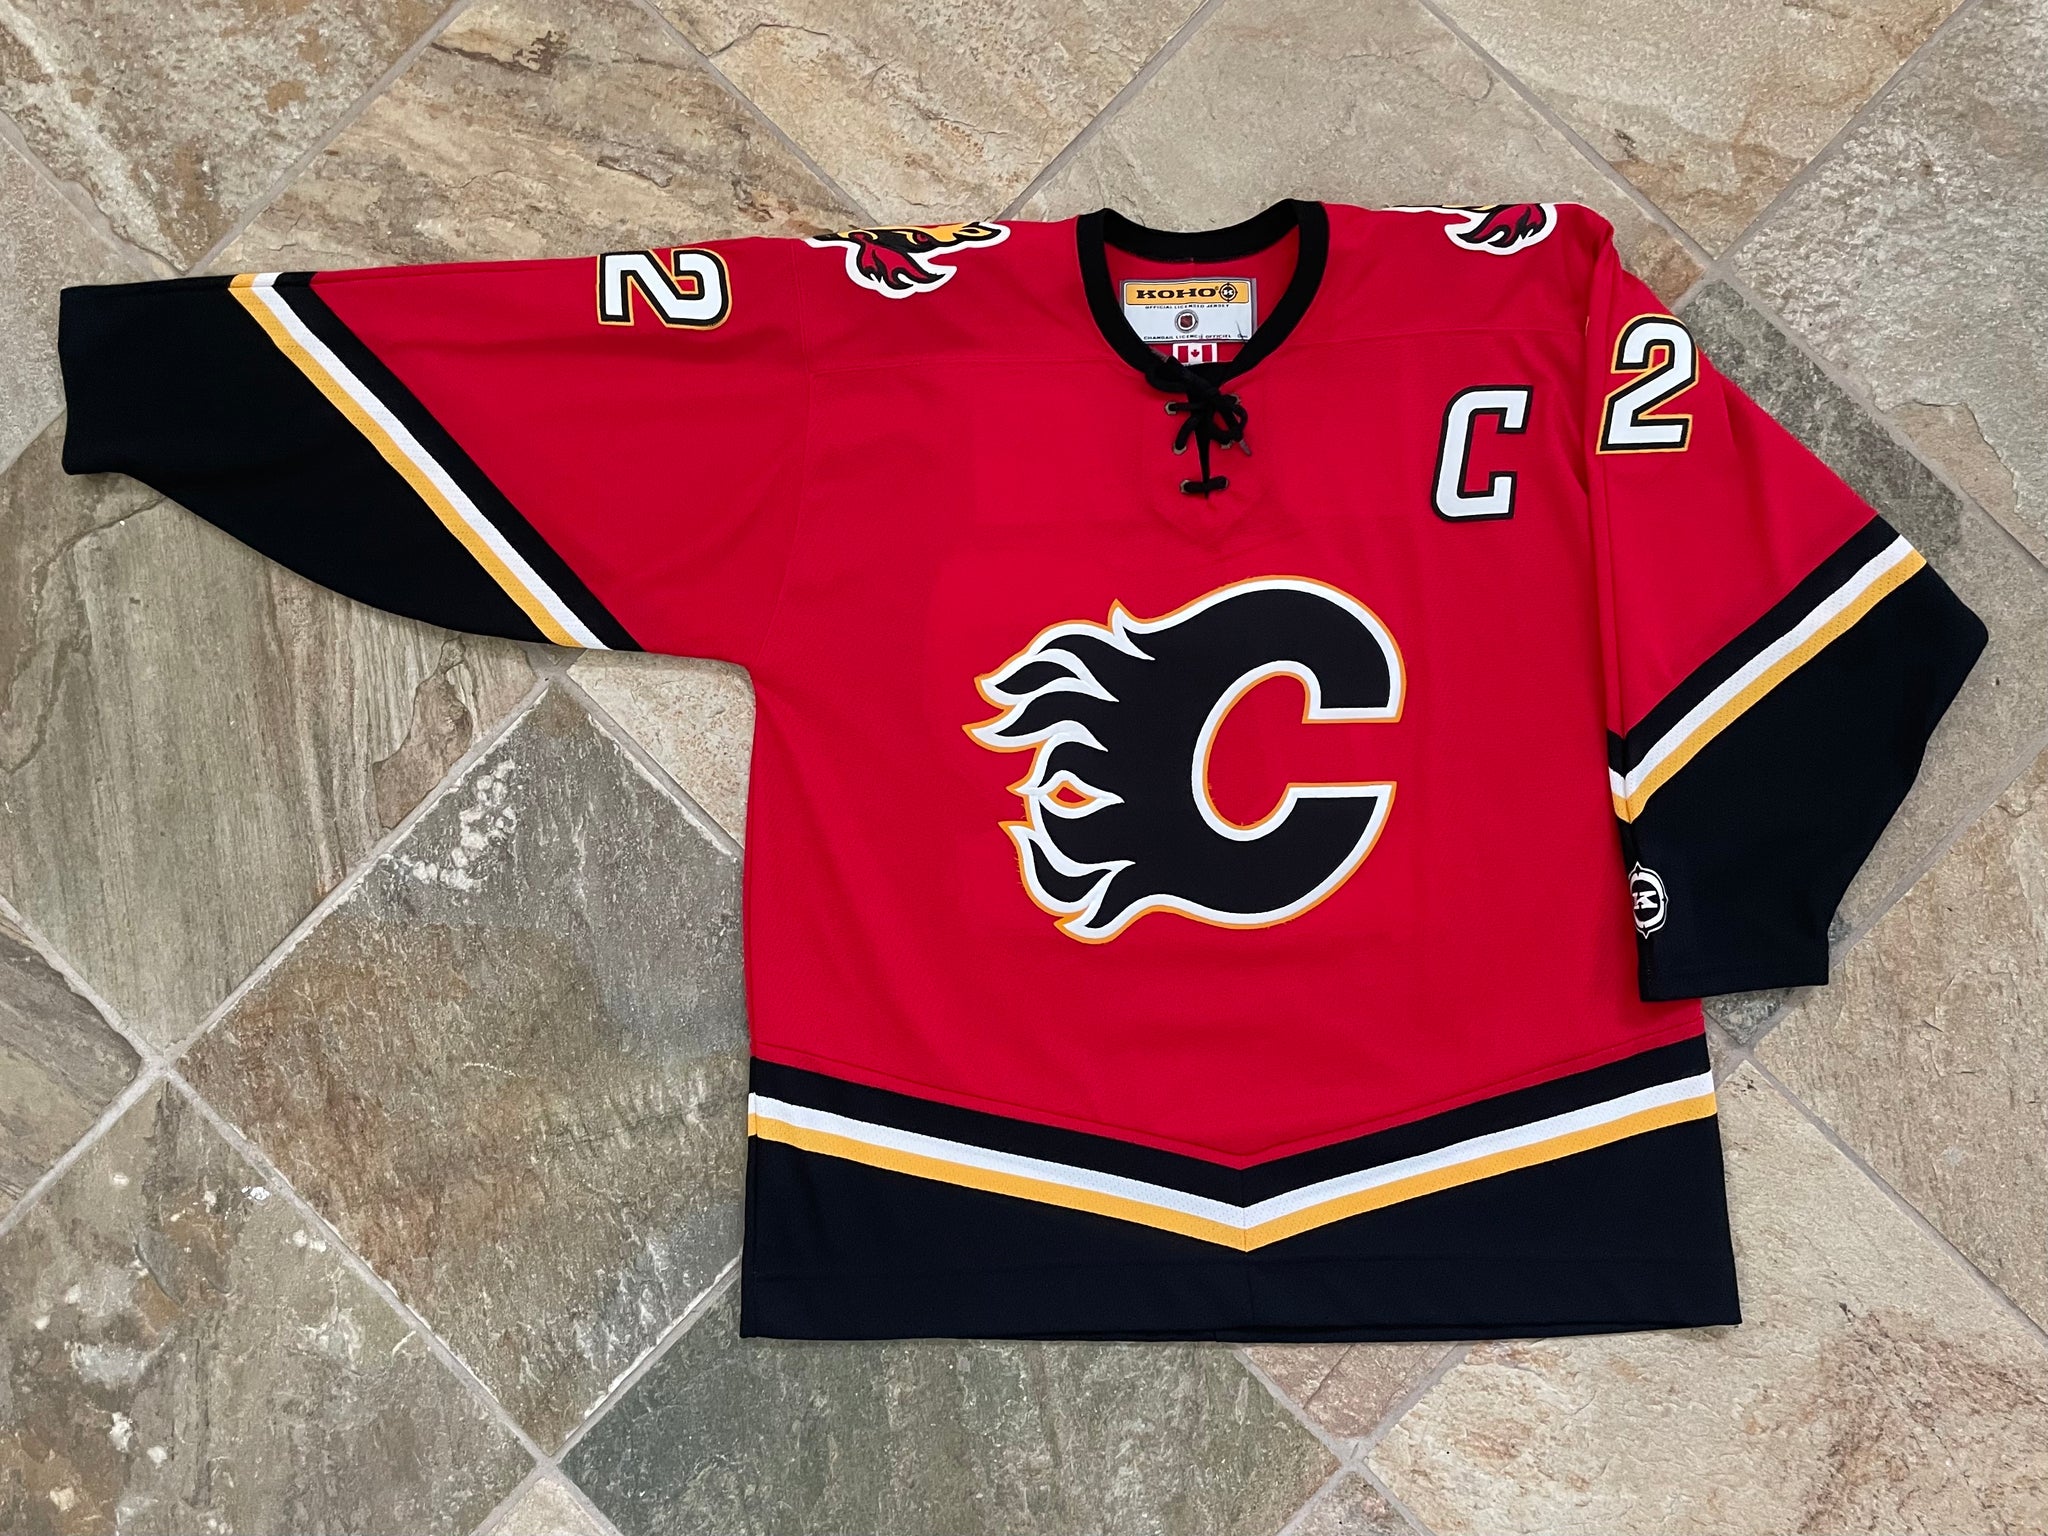 Best Signed Flames Iginla Jersey for sale in Calgary, Alberta for 2023